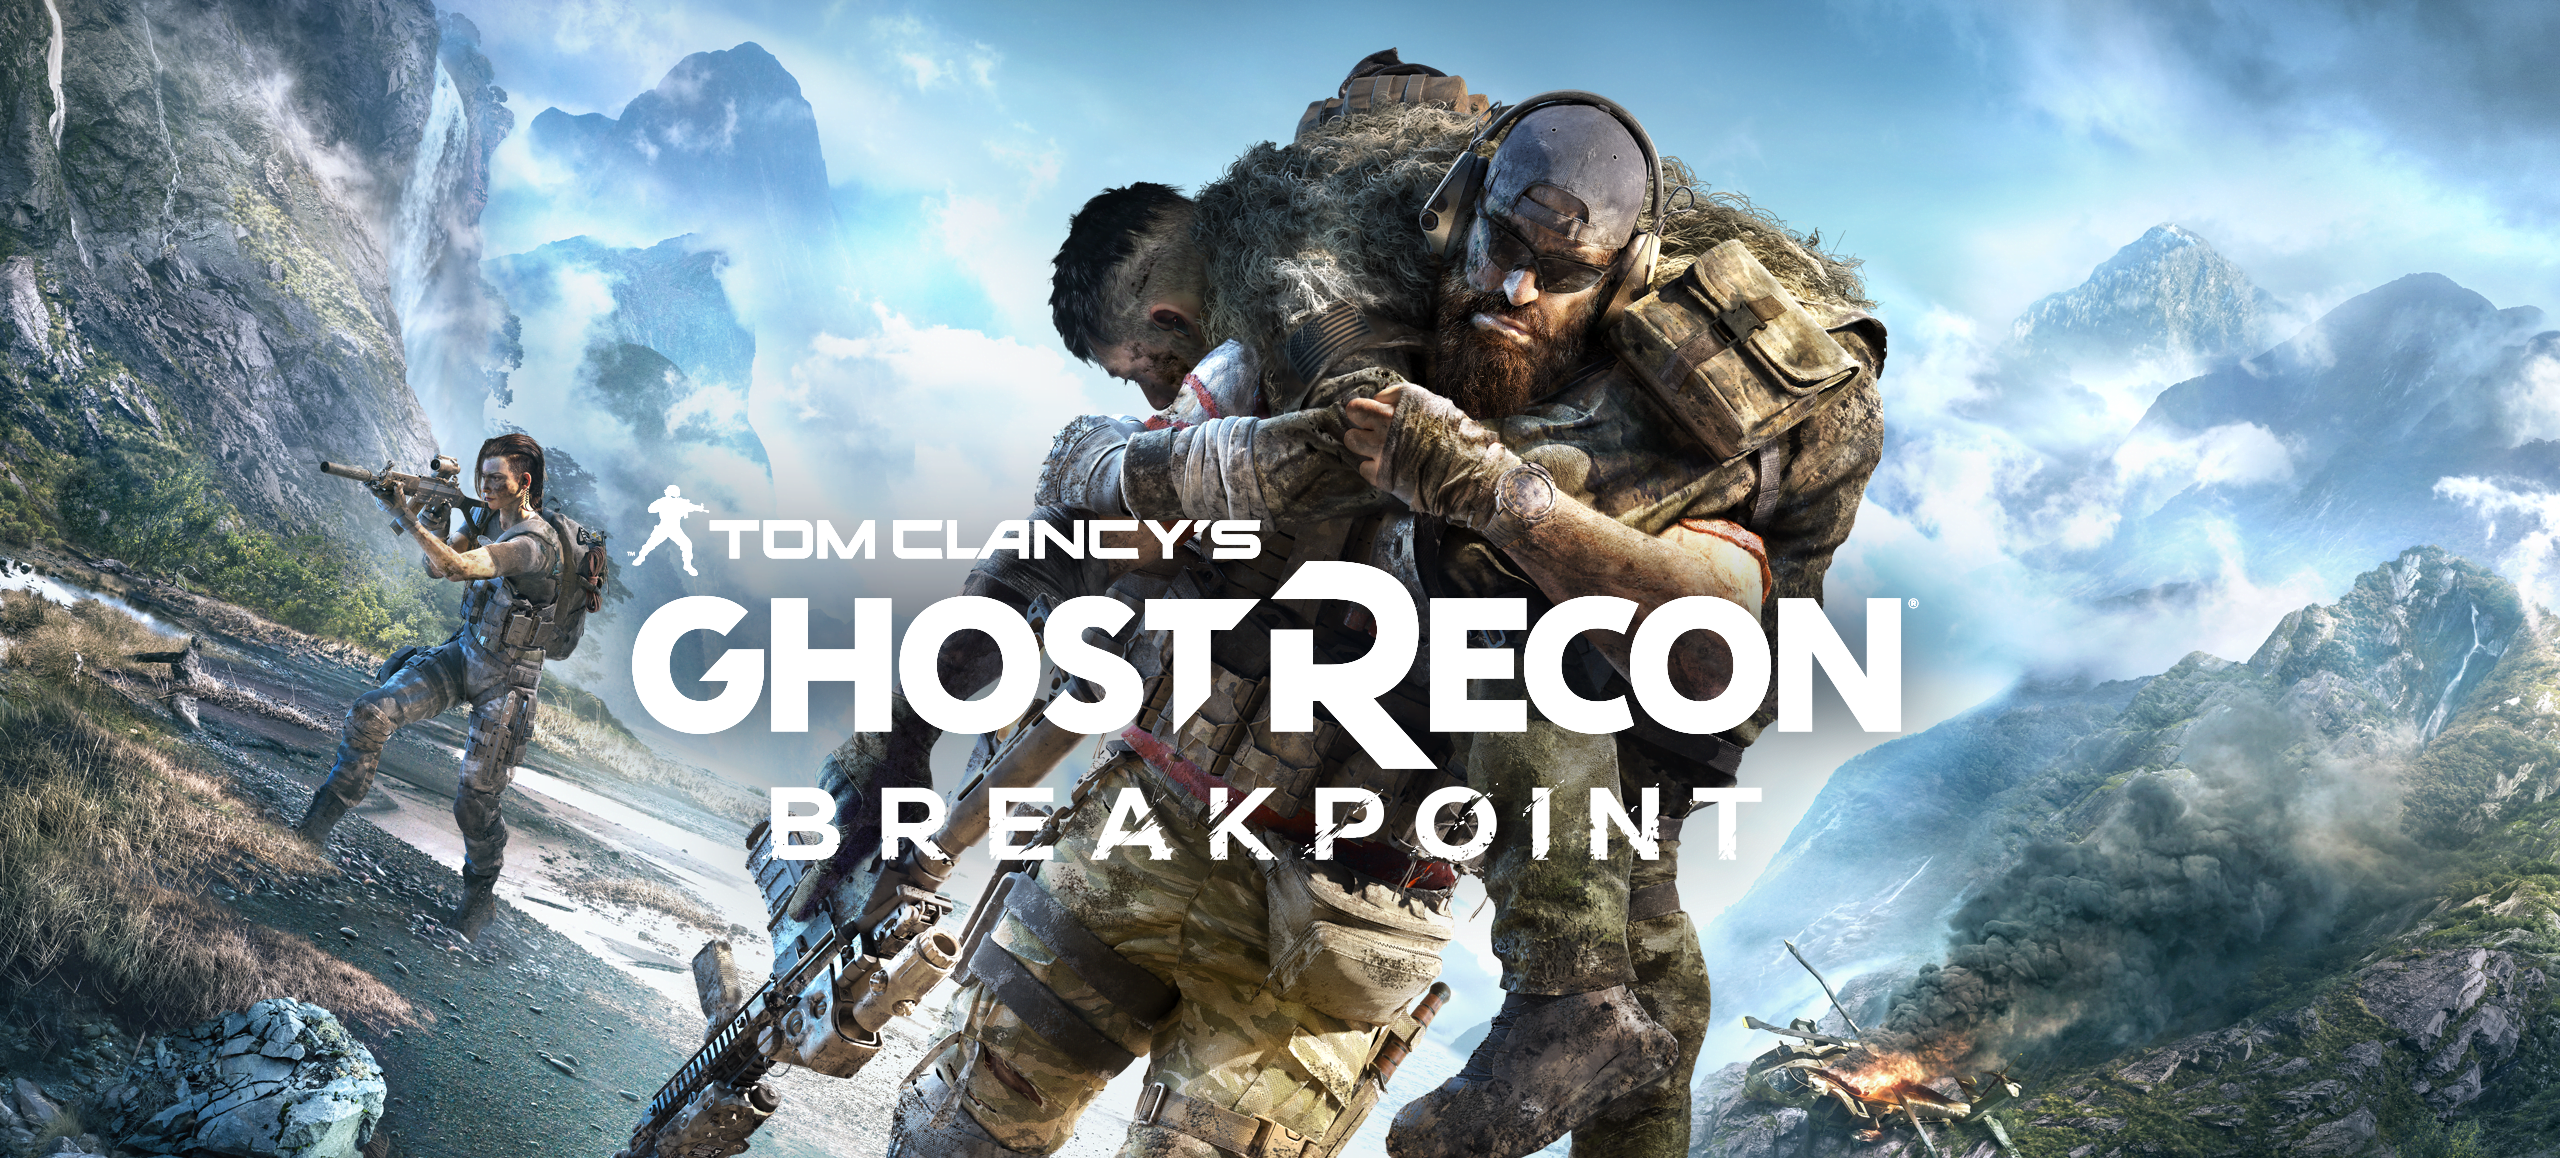 ghost recon breakpoint00